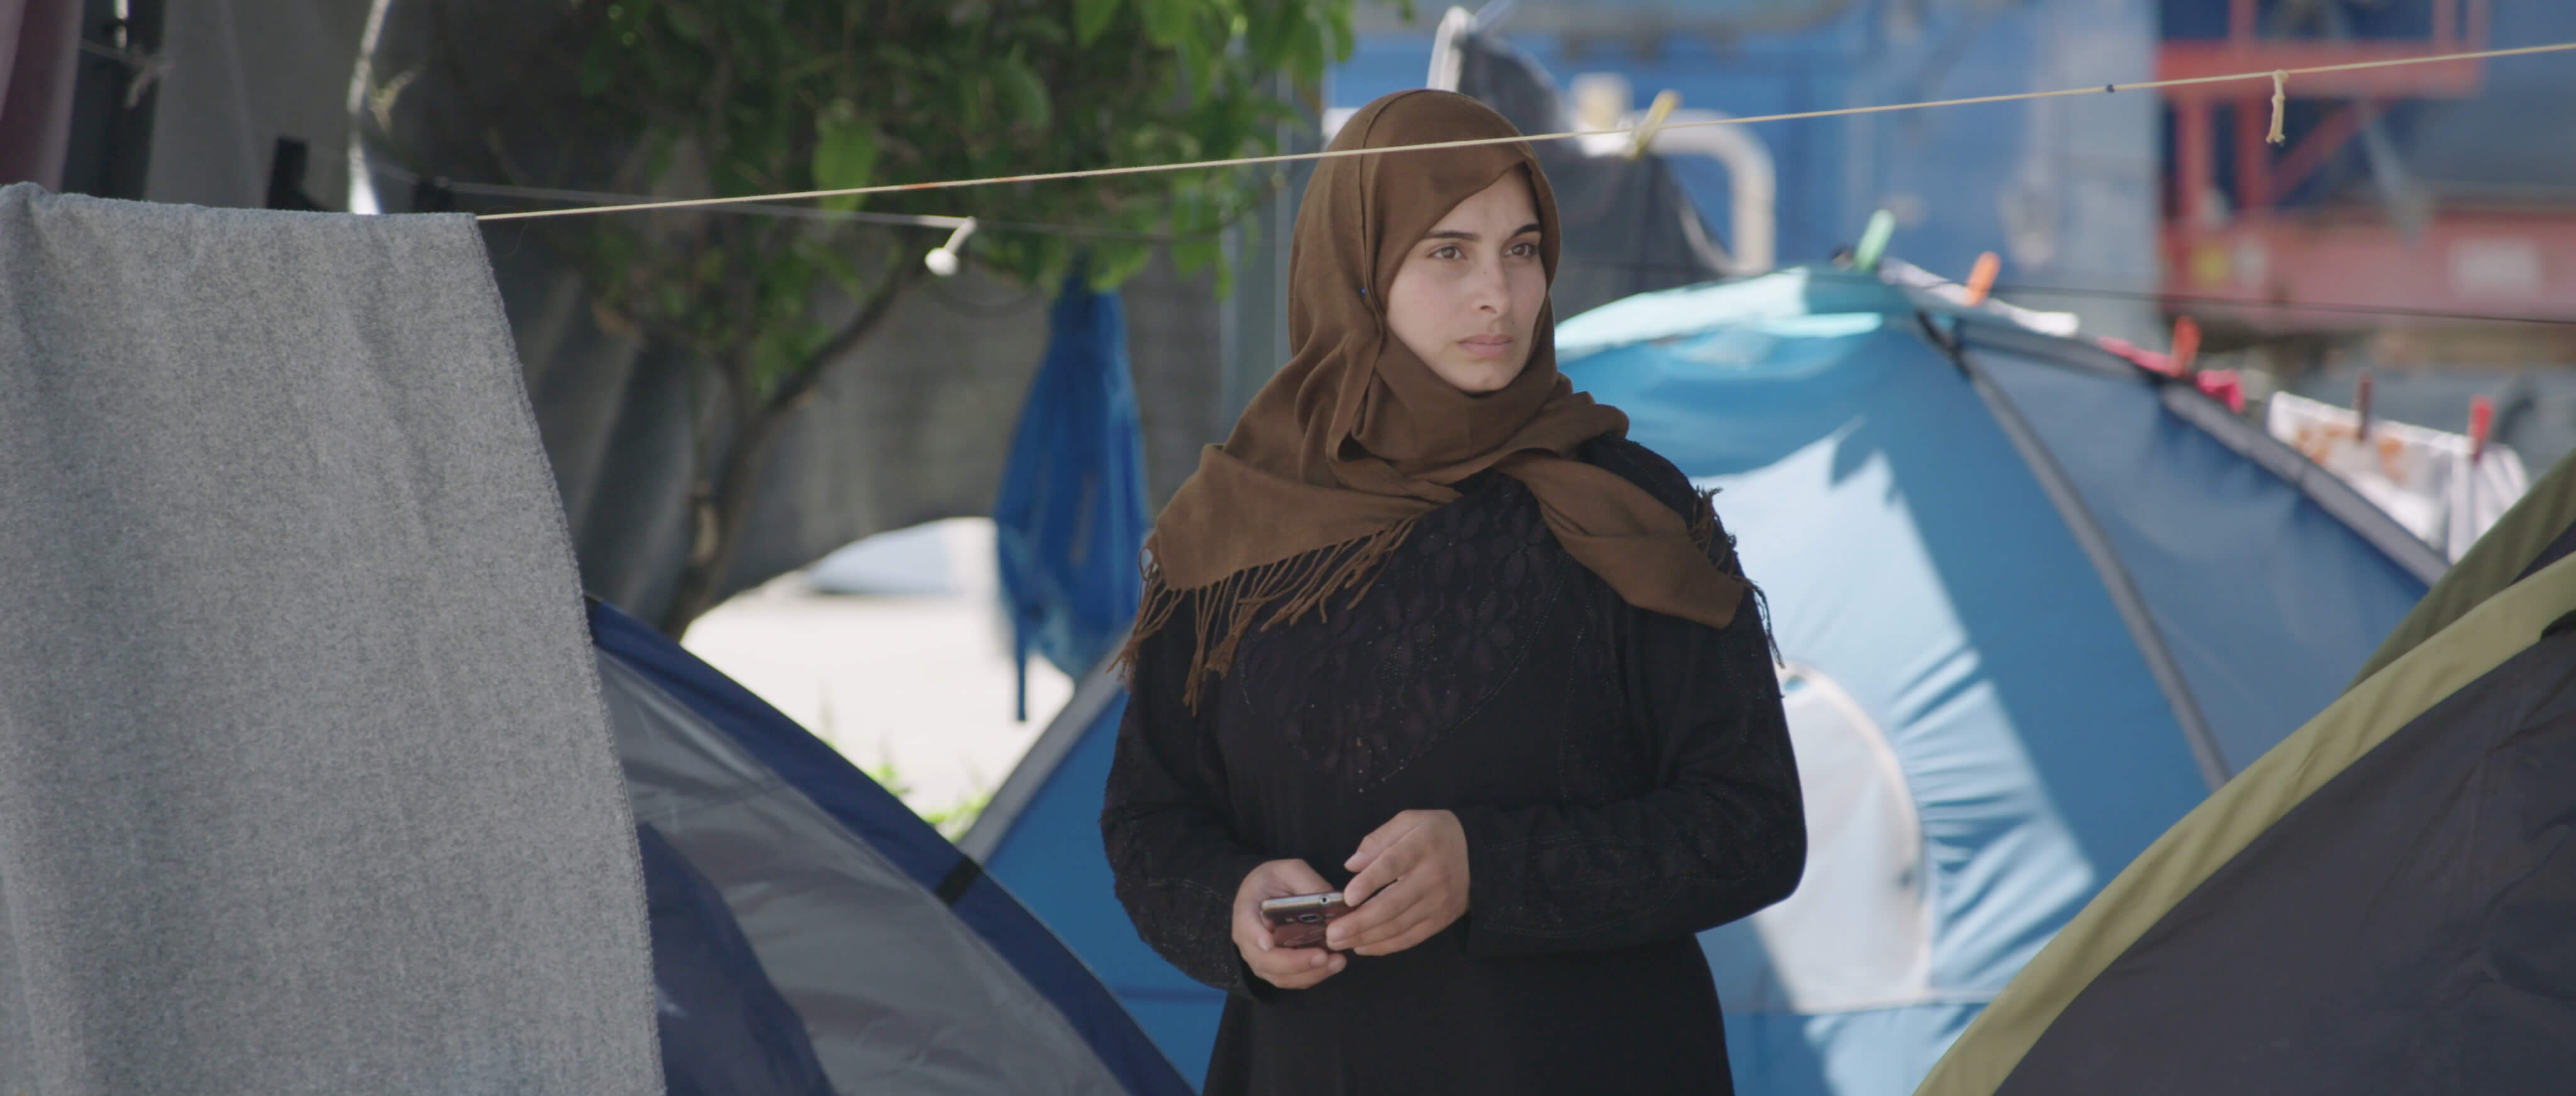 Medium shot of a young woman wearing a hijab, surrounded by camping houses.